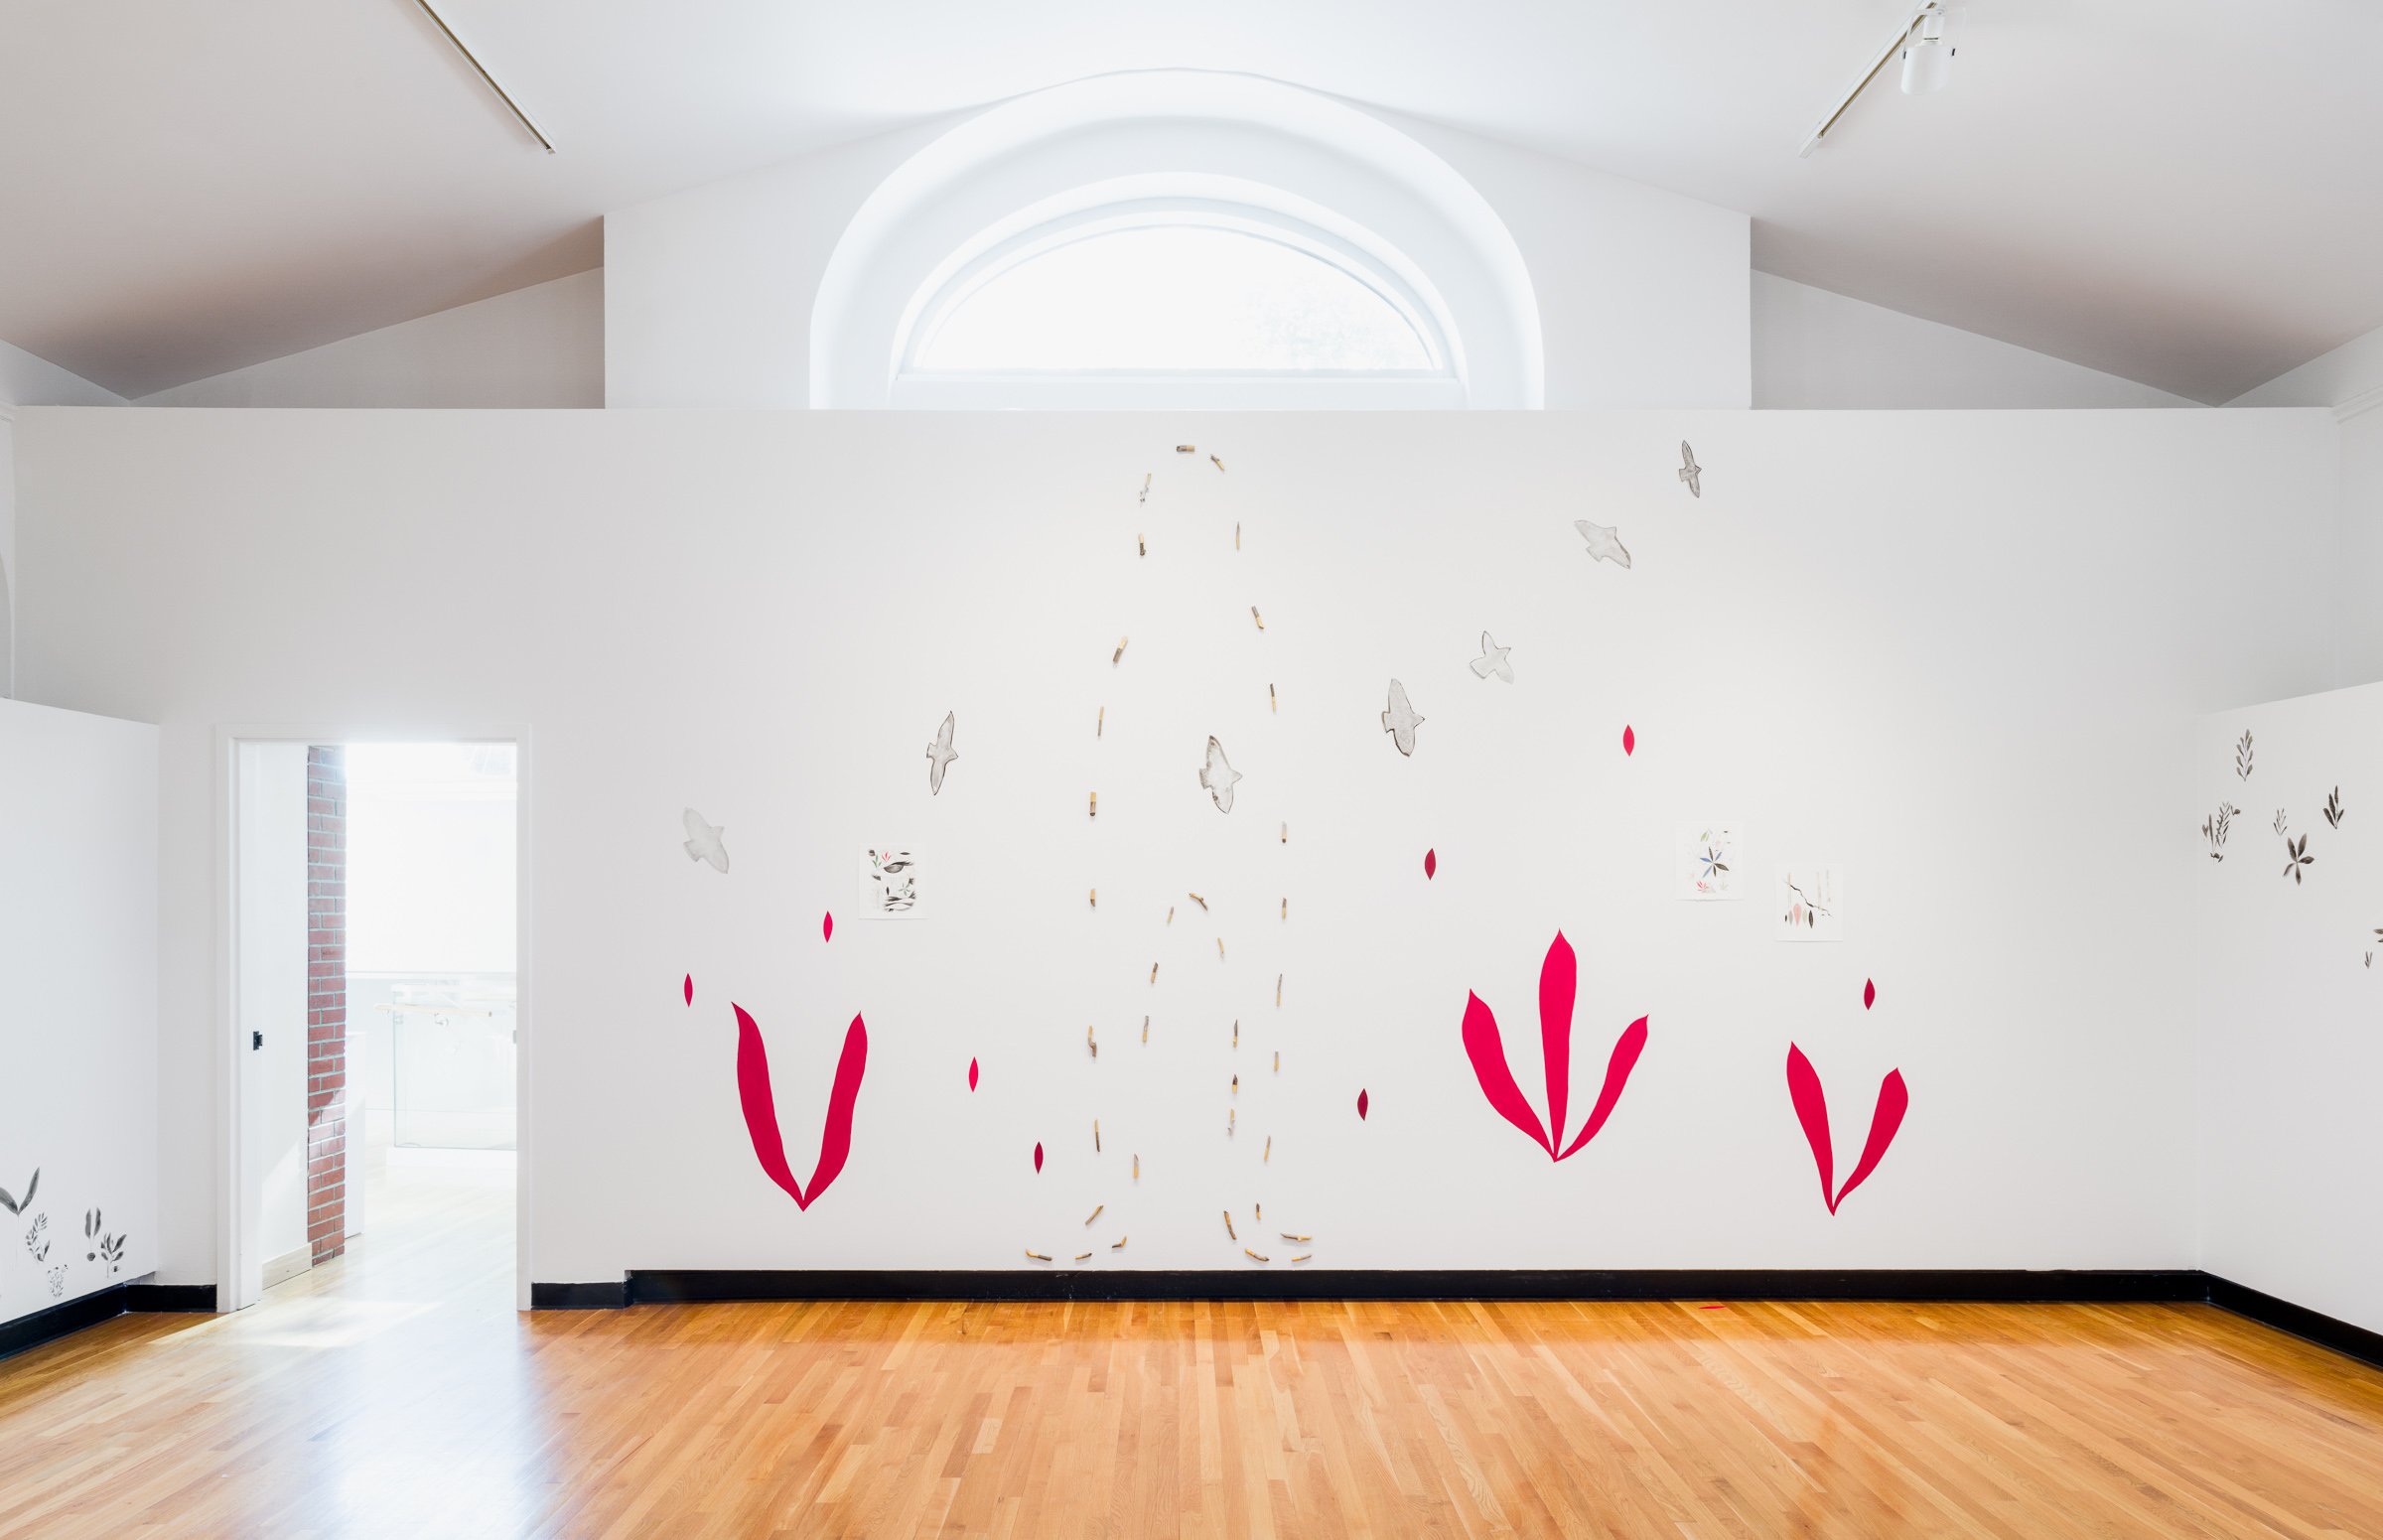  Installation view of  Gathering near and far, still  by April Matisz showing  Just Passing Through,  wood, paint, and India ink on yupo paper, 2023. Courtesy of the artist. Photo by Blaine Campbell. 